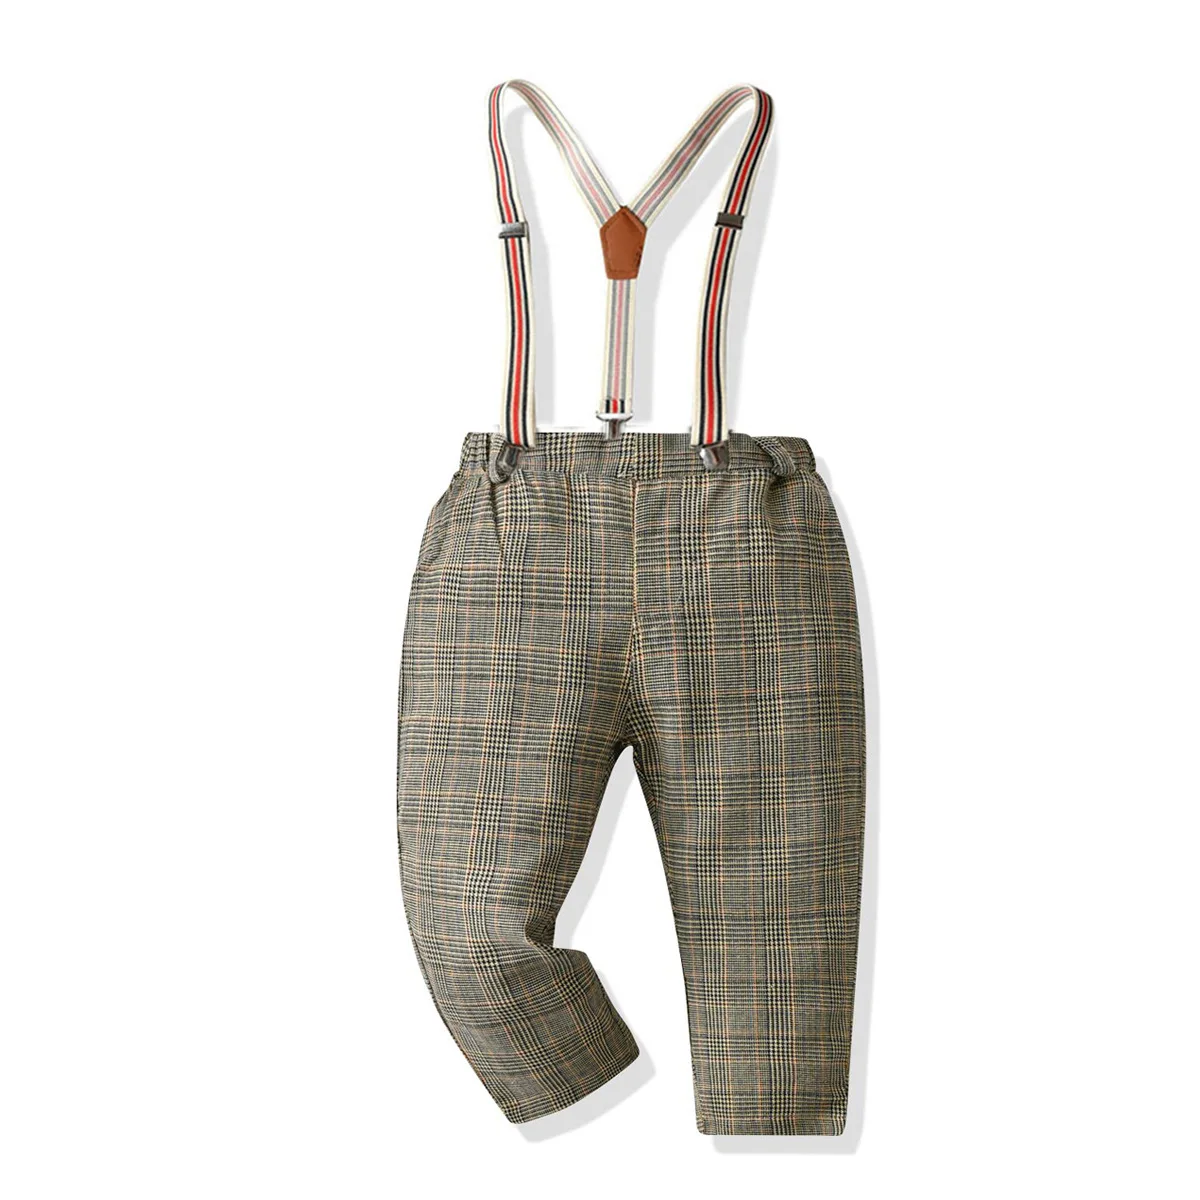 

Baby Boys Suspender Pants Gentleman Casual Cotton Toddler Kids Plaid Overalls Children Fashion Bib Trousers Infant Clothing